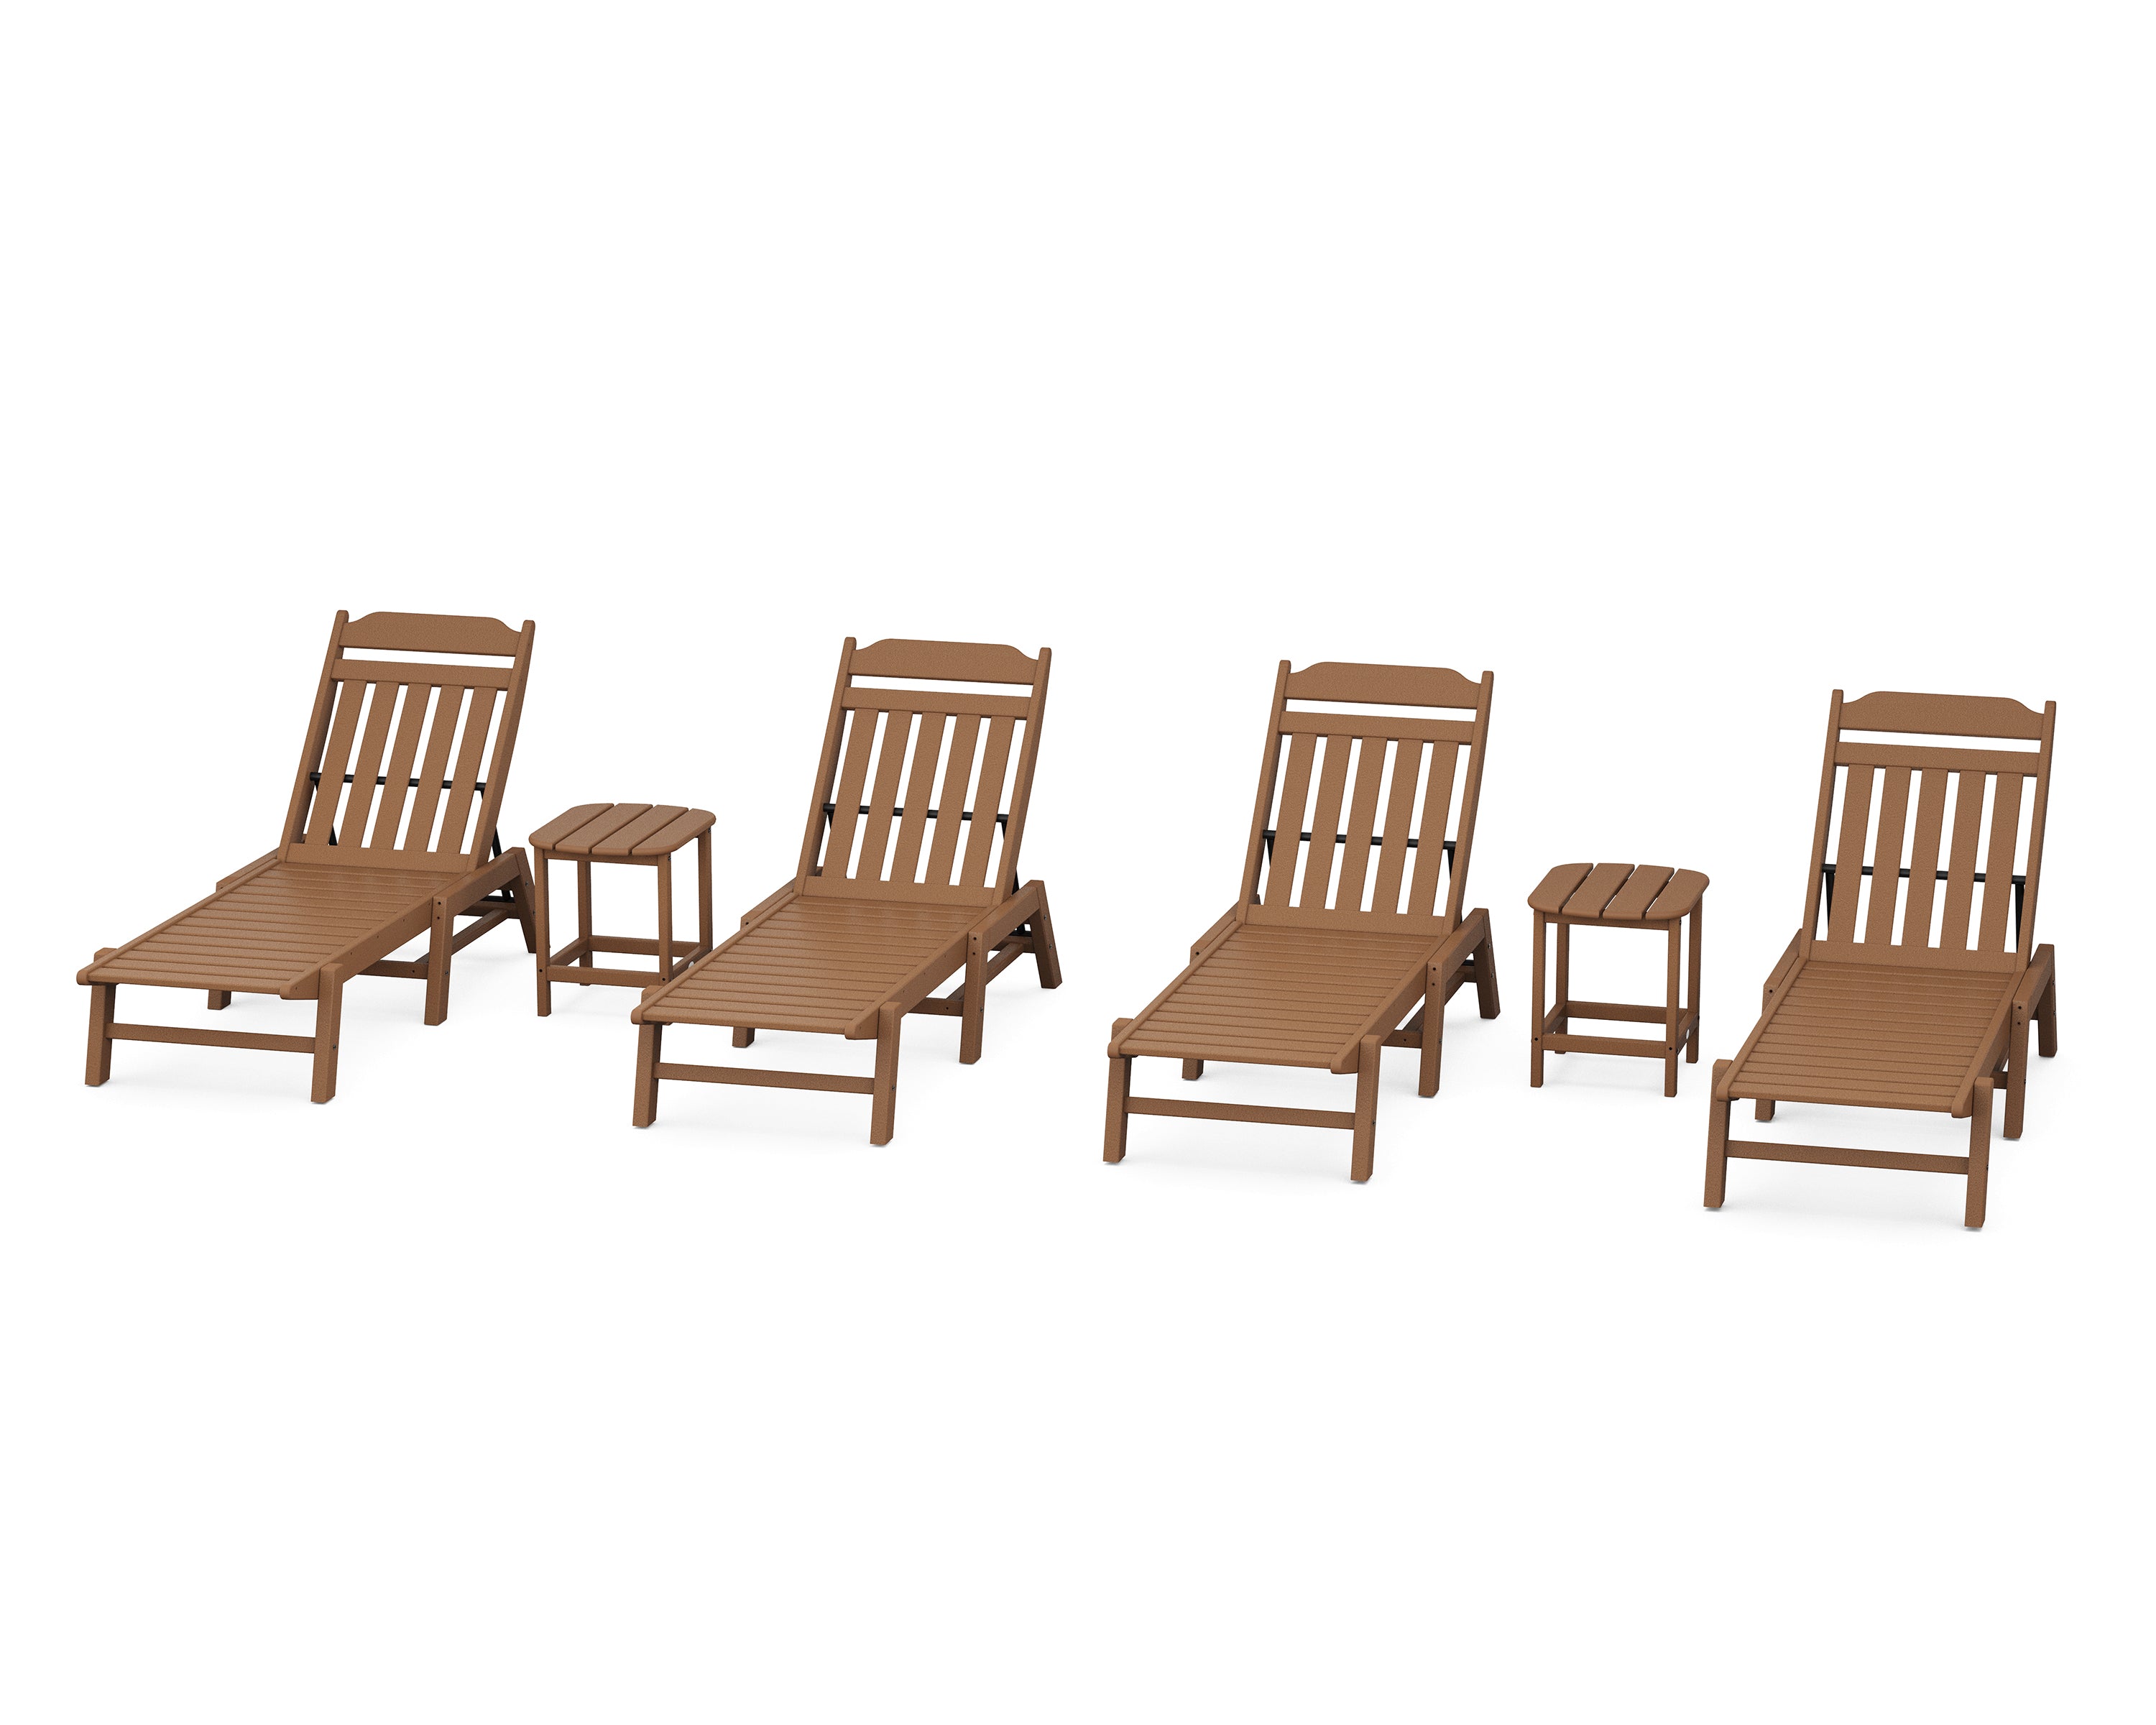 POLYWOOD Country Living 6-Piece Chaise Set in Teak